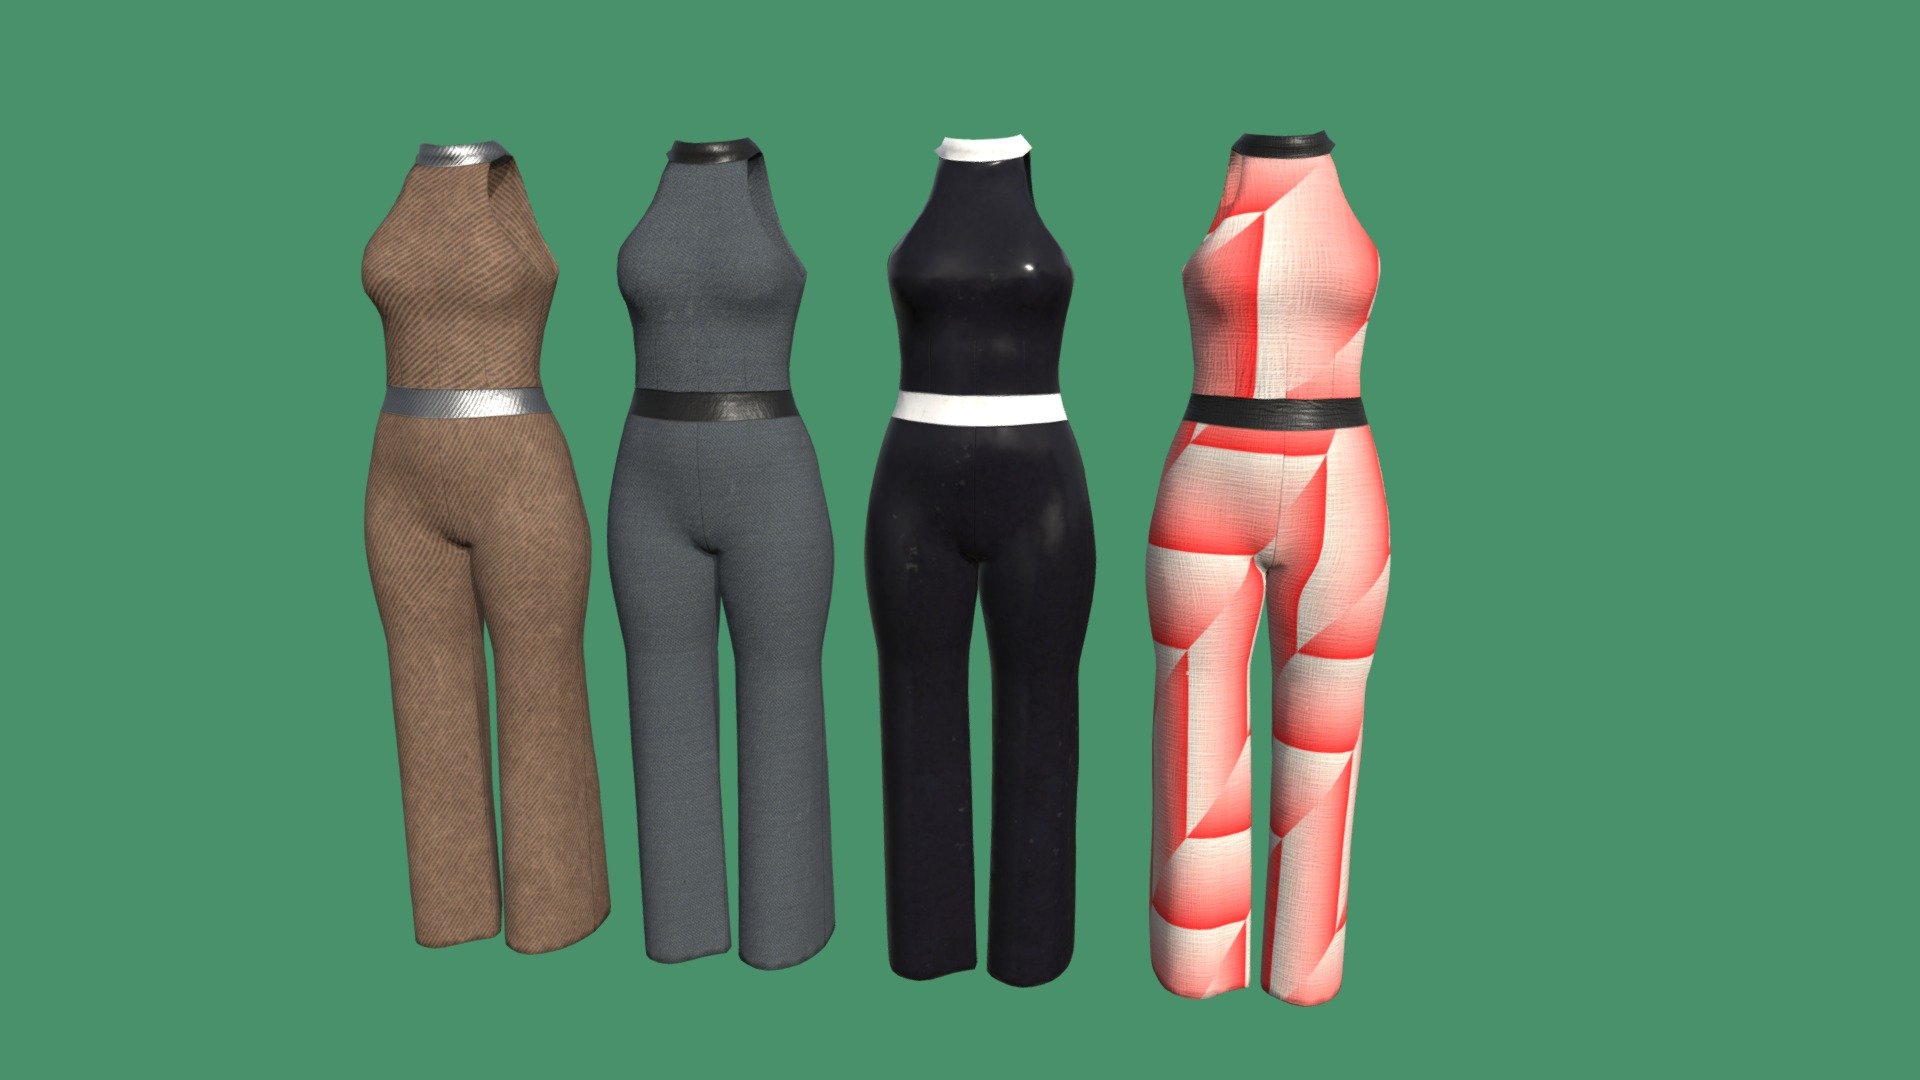 Clothes created in Blender. 
It includes a set of 4 texture designs in different resolutions, a 3D model without thickness and a 3D model with thickness.

This model is available in the following file formats:




.blend (Blender native format)

.fbx (Autodesk fbx)

.obj (Object file with mtl)

.abc (Alembic)

.dae (Collada)

.stl (Stereolithography)

.usd (Universal Scene Description)

.glb

There is a zip file with some renders in PNG format with alpha/transparency.
The model has a non-overlapping UV Map.
The polygons in the model are Tris.

Polygons (3D model without thickness)




Verts 4448

Faces 8786

Tris 8786

The model has PBR textures: Base Color, Metallic, Roughness, Ambient Occlusion, Specular, Normals OpenGl and DirectX Map.

The textures are in PNG format and they are available in these dimensions:




2048x2048

1024x1024

512x512

Dimensions of the 3D model: 0.354m x 0.231m x 1.29m - Clothes n3 - Buy Royalty Free 3D model by GattalupaGames 3d model